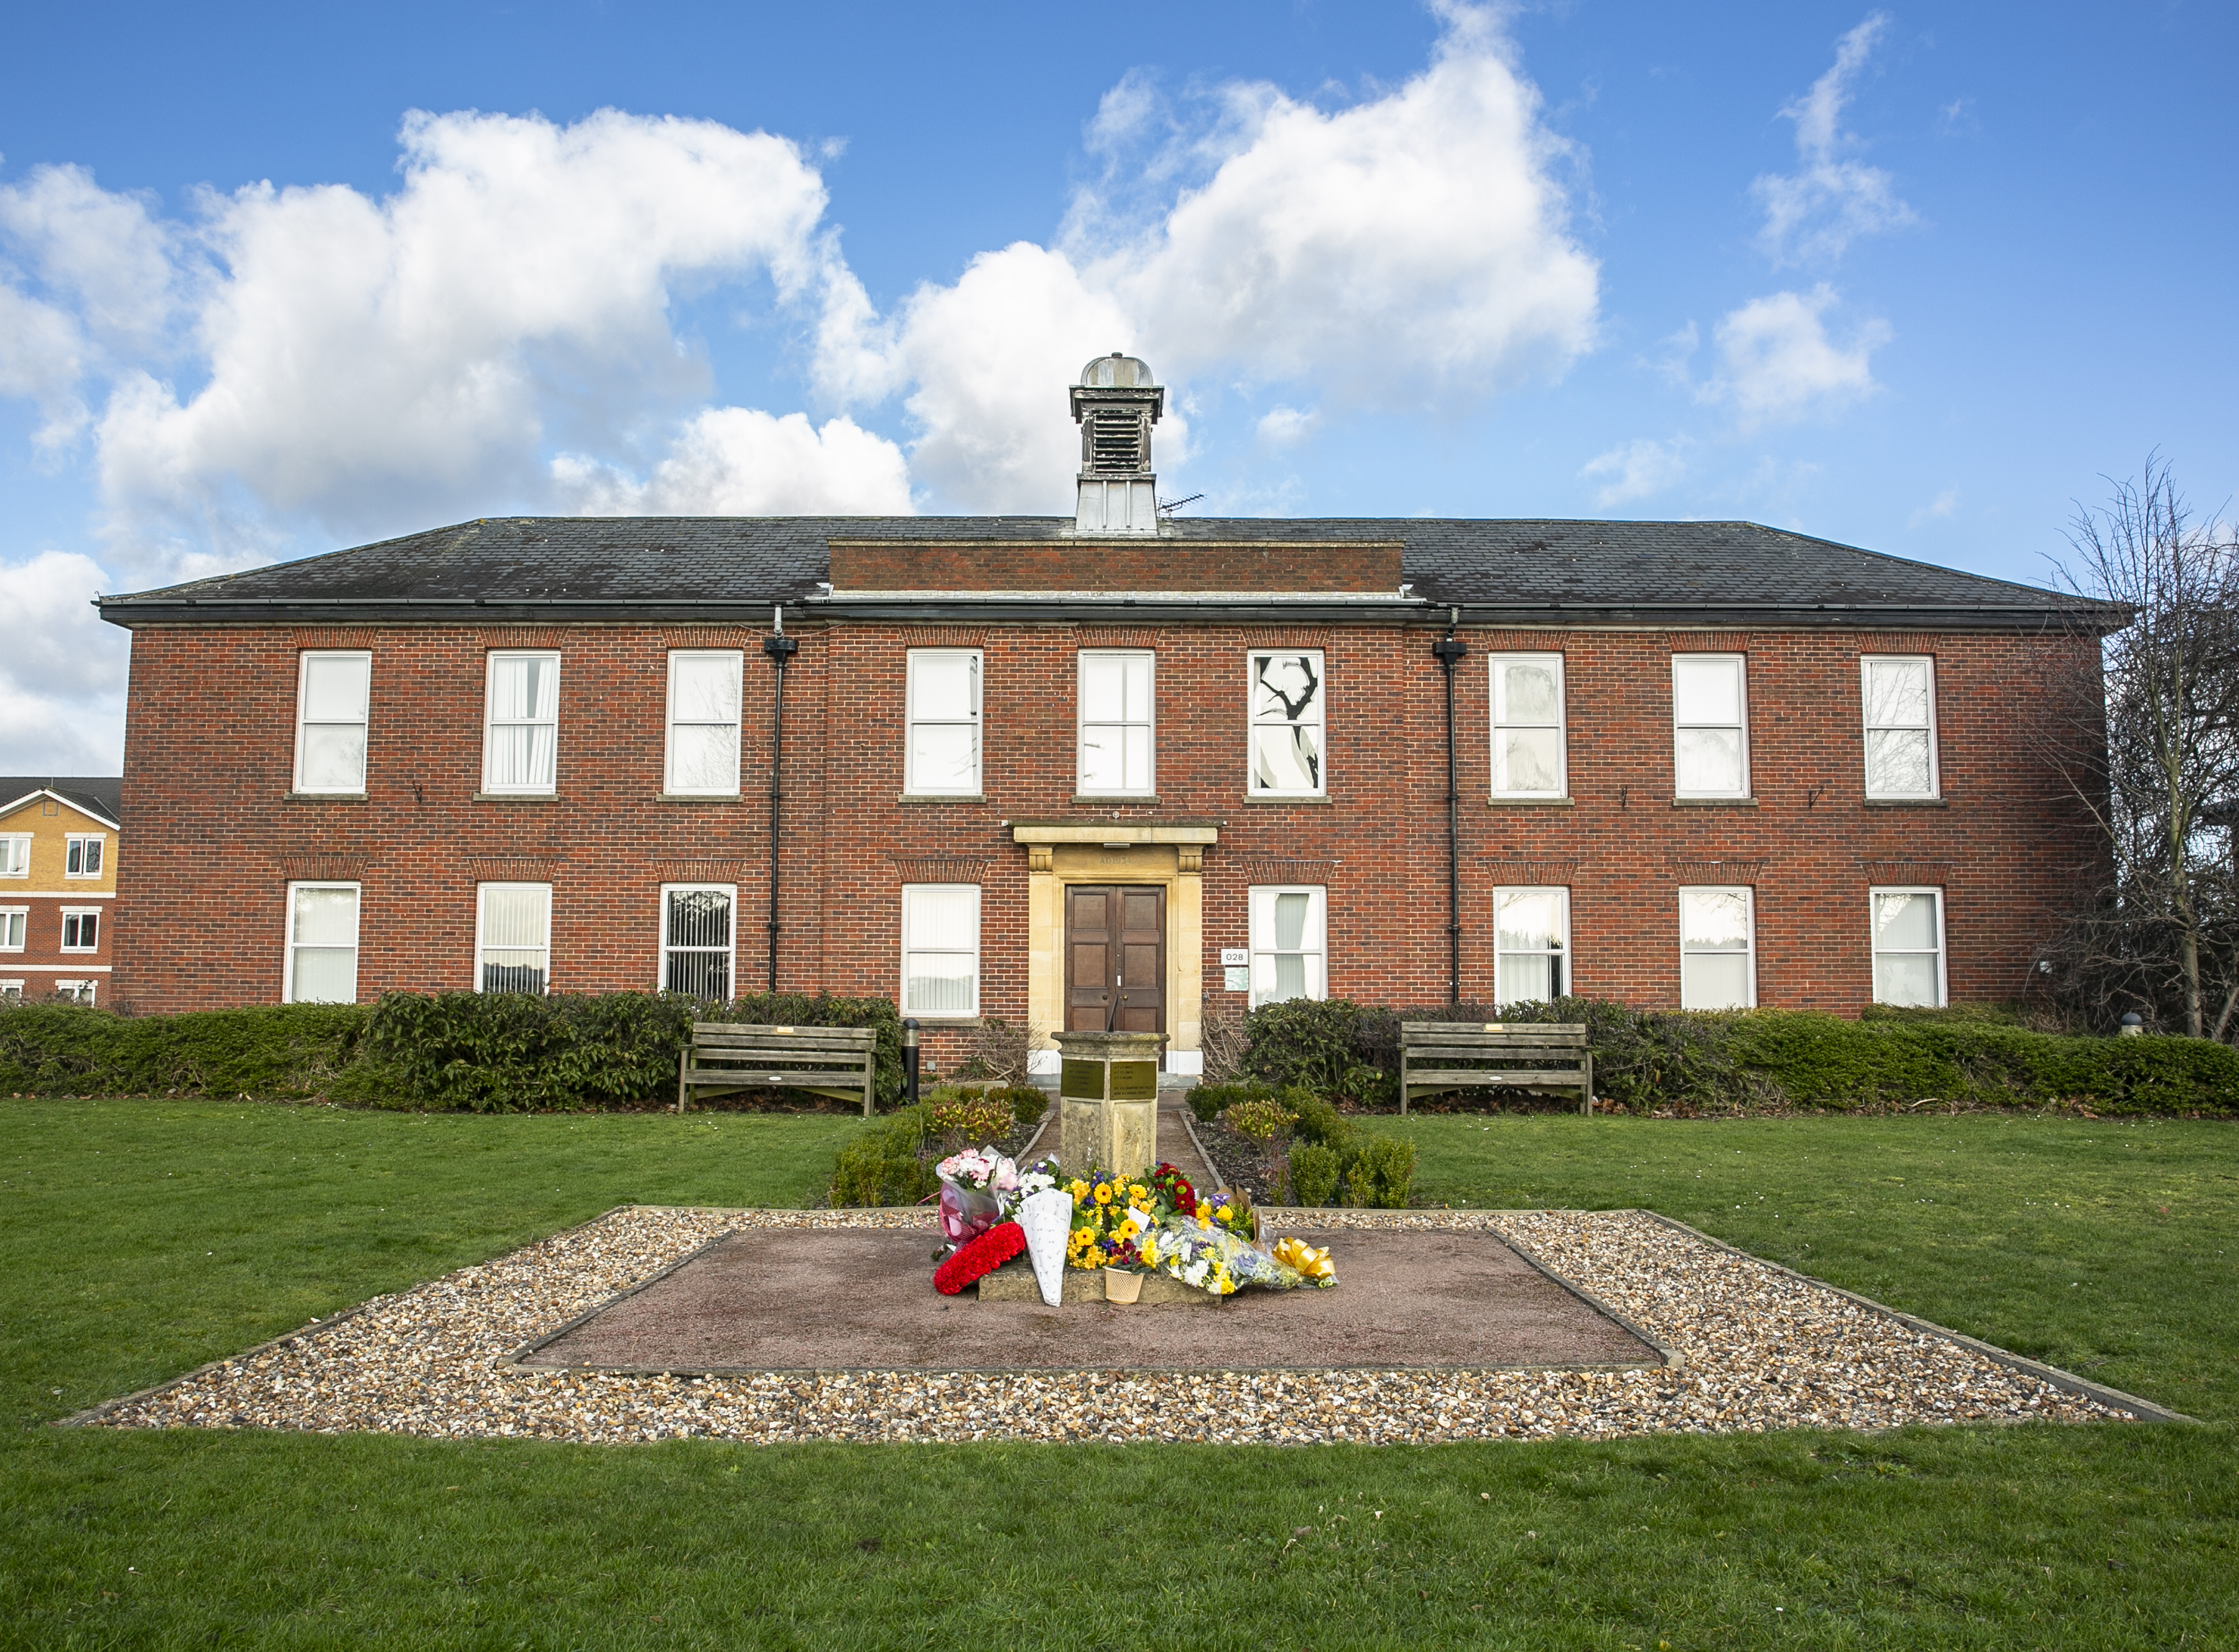 Building with memorial and flowers outside.